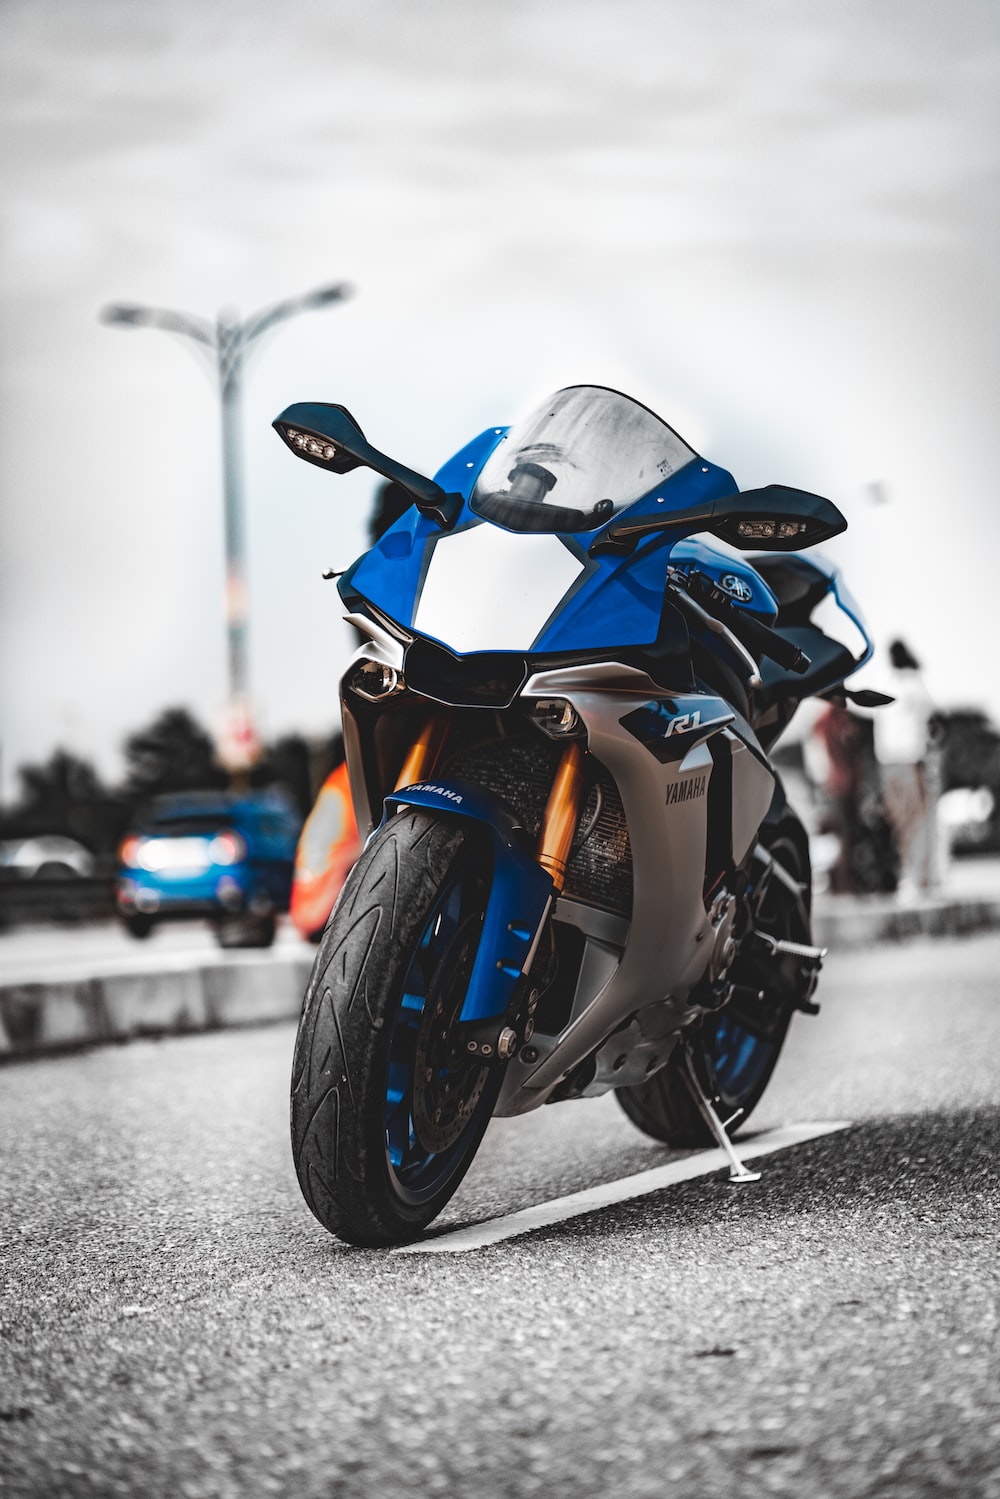 Hd Motorcycle Wallpapers